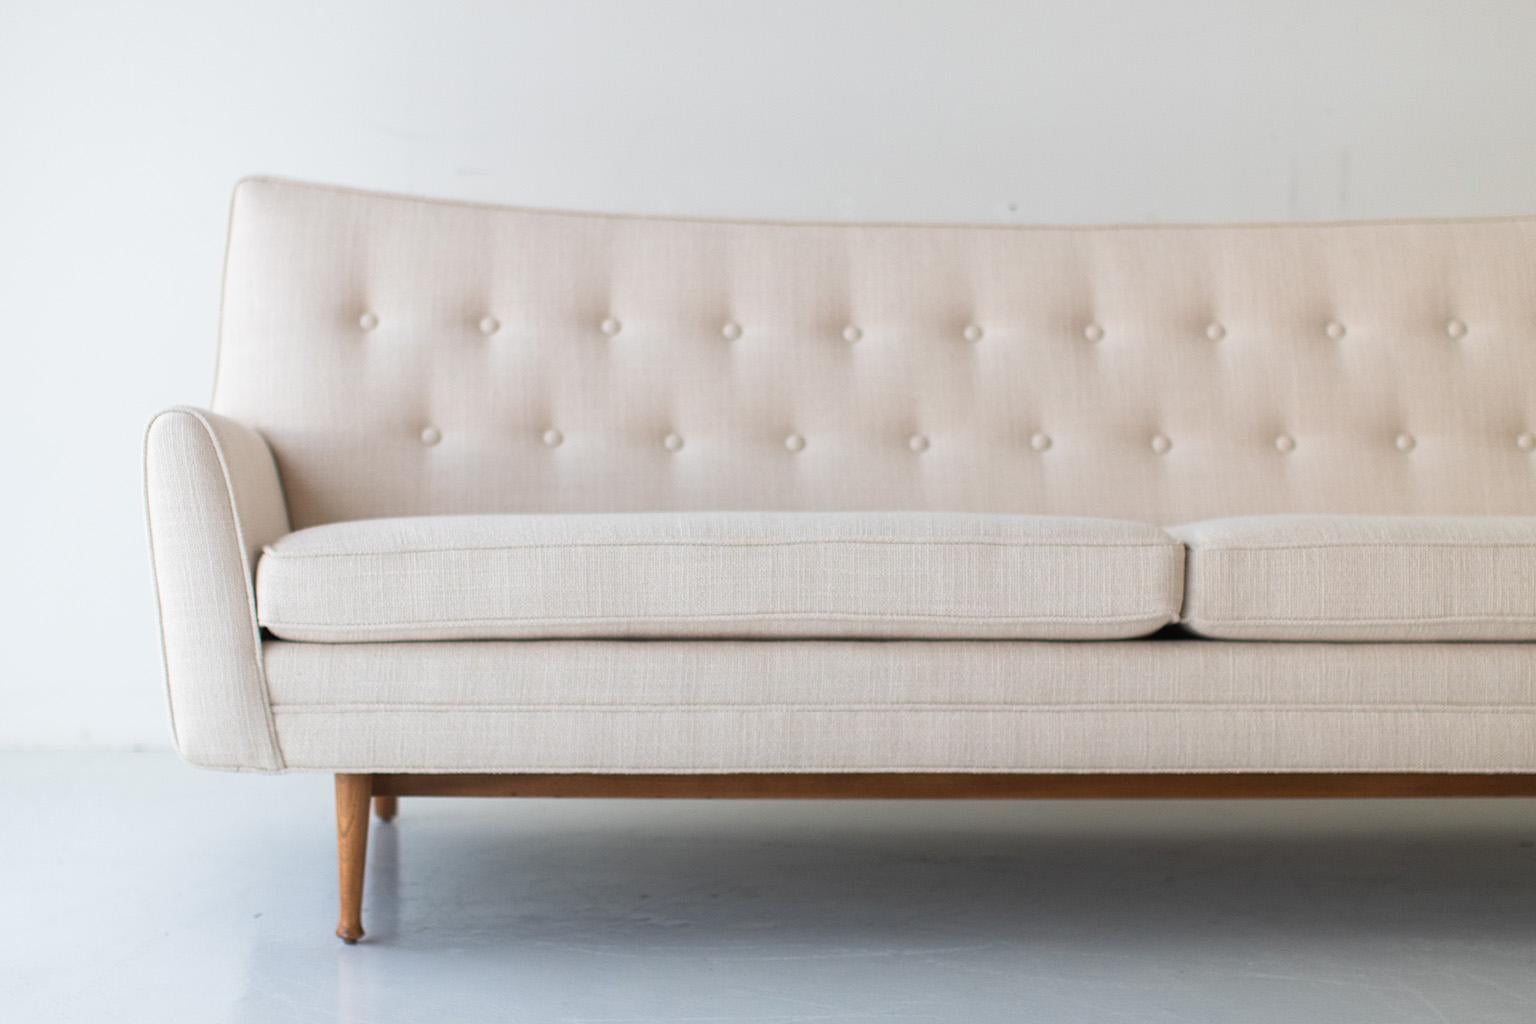 Designer: Lawrence Peabody.

Manufacturer: Nemschoff.
Period/Model: Mid-Century Modern.
Specs: Elm, Thick Weave Blend (off white).

Condition:

This Lawrence Peabody sofa for Richardson Nemschoff is in excellent restored condition. The elm